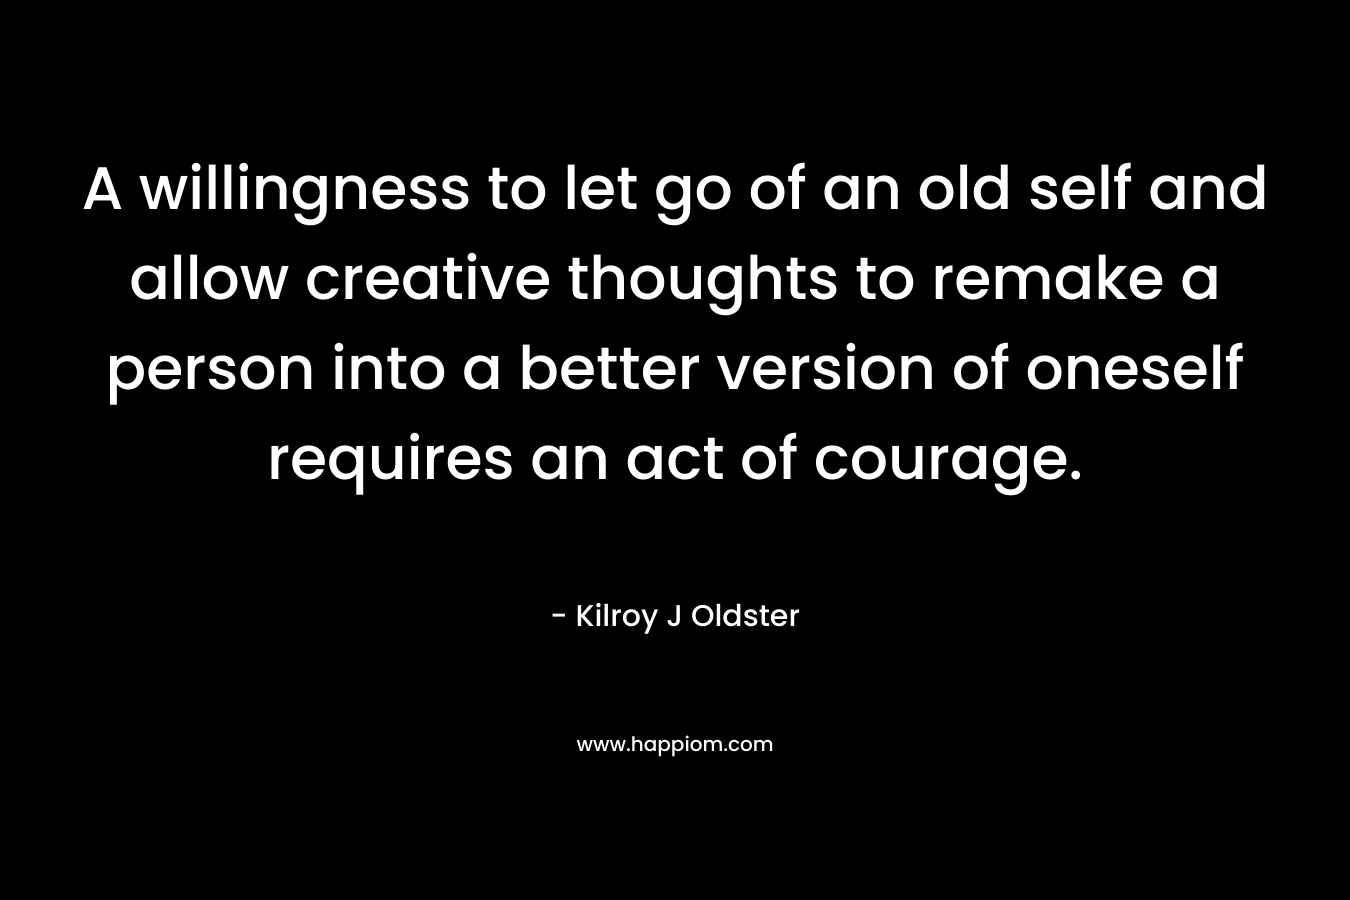 A willingness to let go of an old self and allow creative thoughts to remake a person into a better version of oneself requires an act of courage. – Kilroy J Oldster